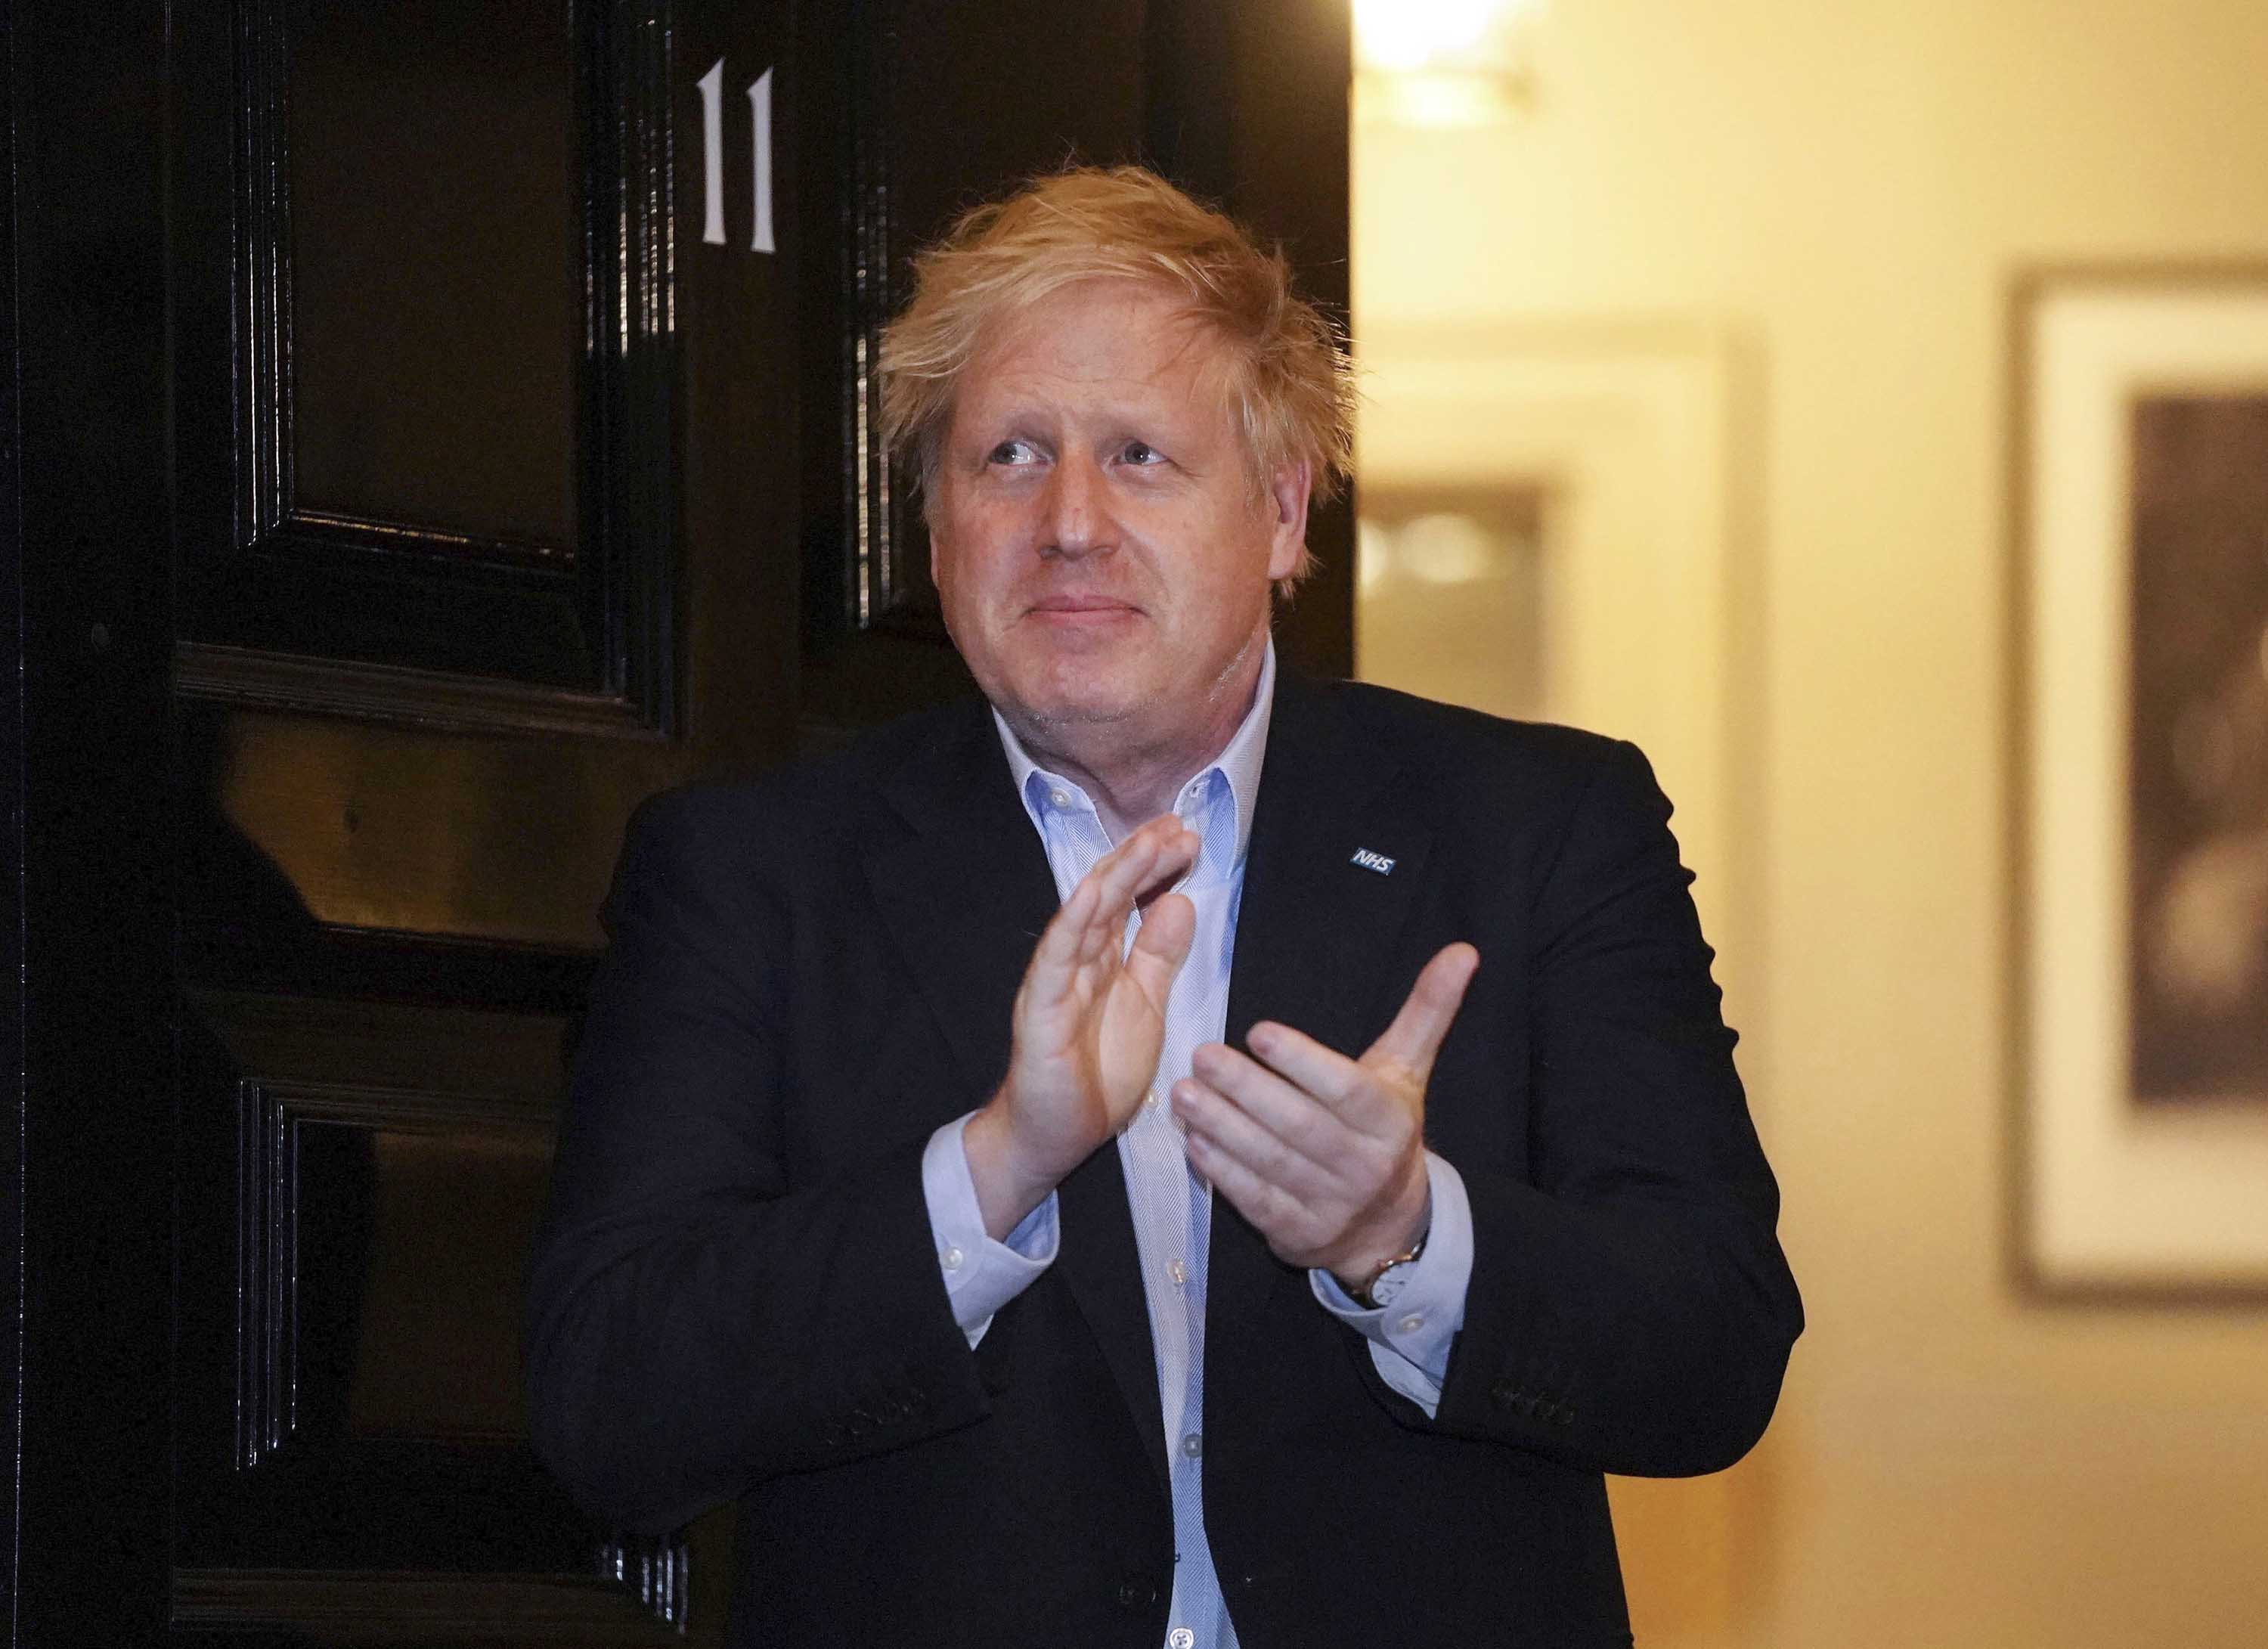 British Prime Minister Boris Johnson claps outside Downing Street in London on April 2, during a nationwide "Clap for Carers" NHS initiative to applaud workers fighting the coronavirus pandemic.